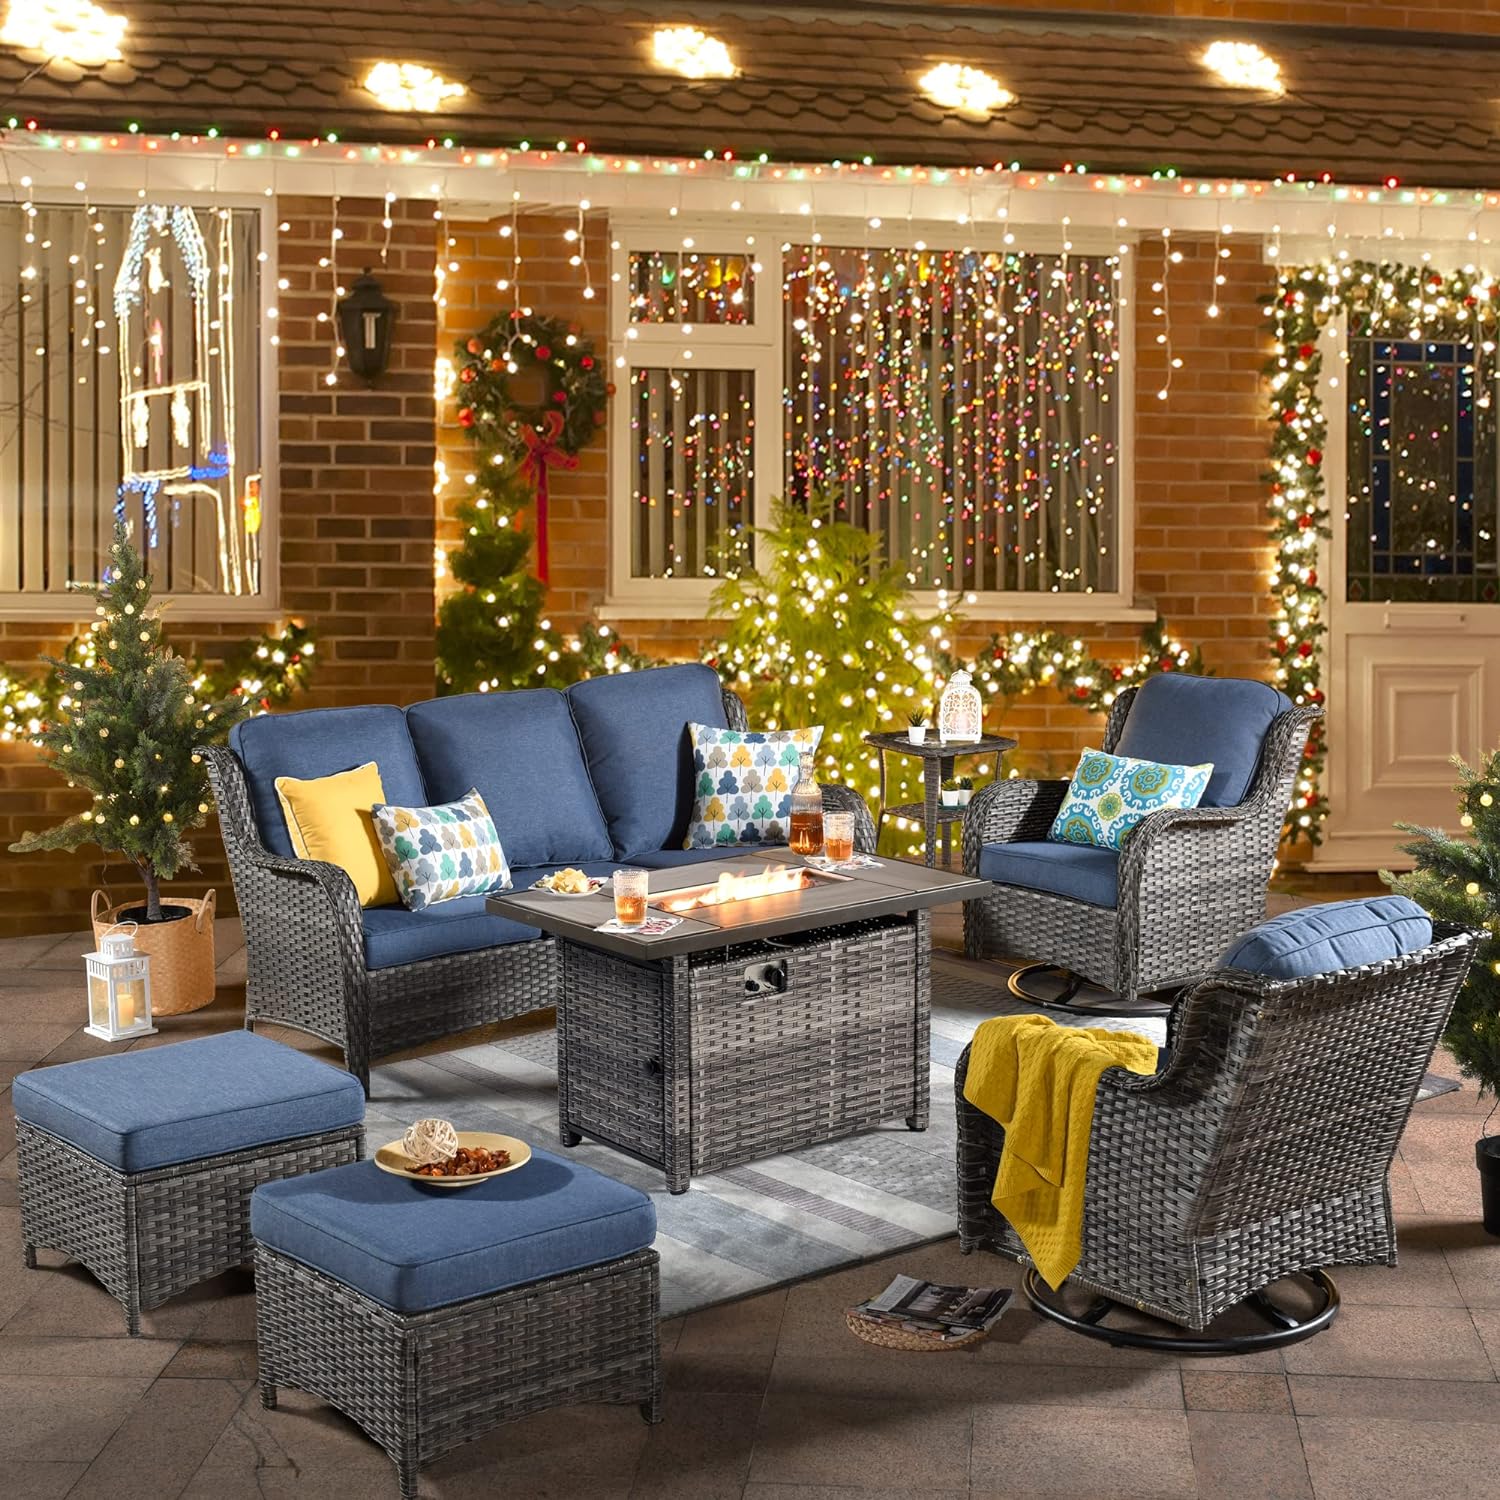 Outdoor Swivel Rocking Chairs Patio Furniture Set with 50,000 BTU Rectangular Propane Fire Pit Table 7 Pieces High Back Conversation Sofa and Matching Side Table,Grey Rattan Denim Blue